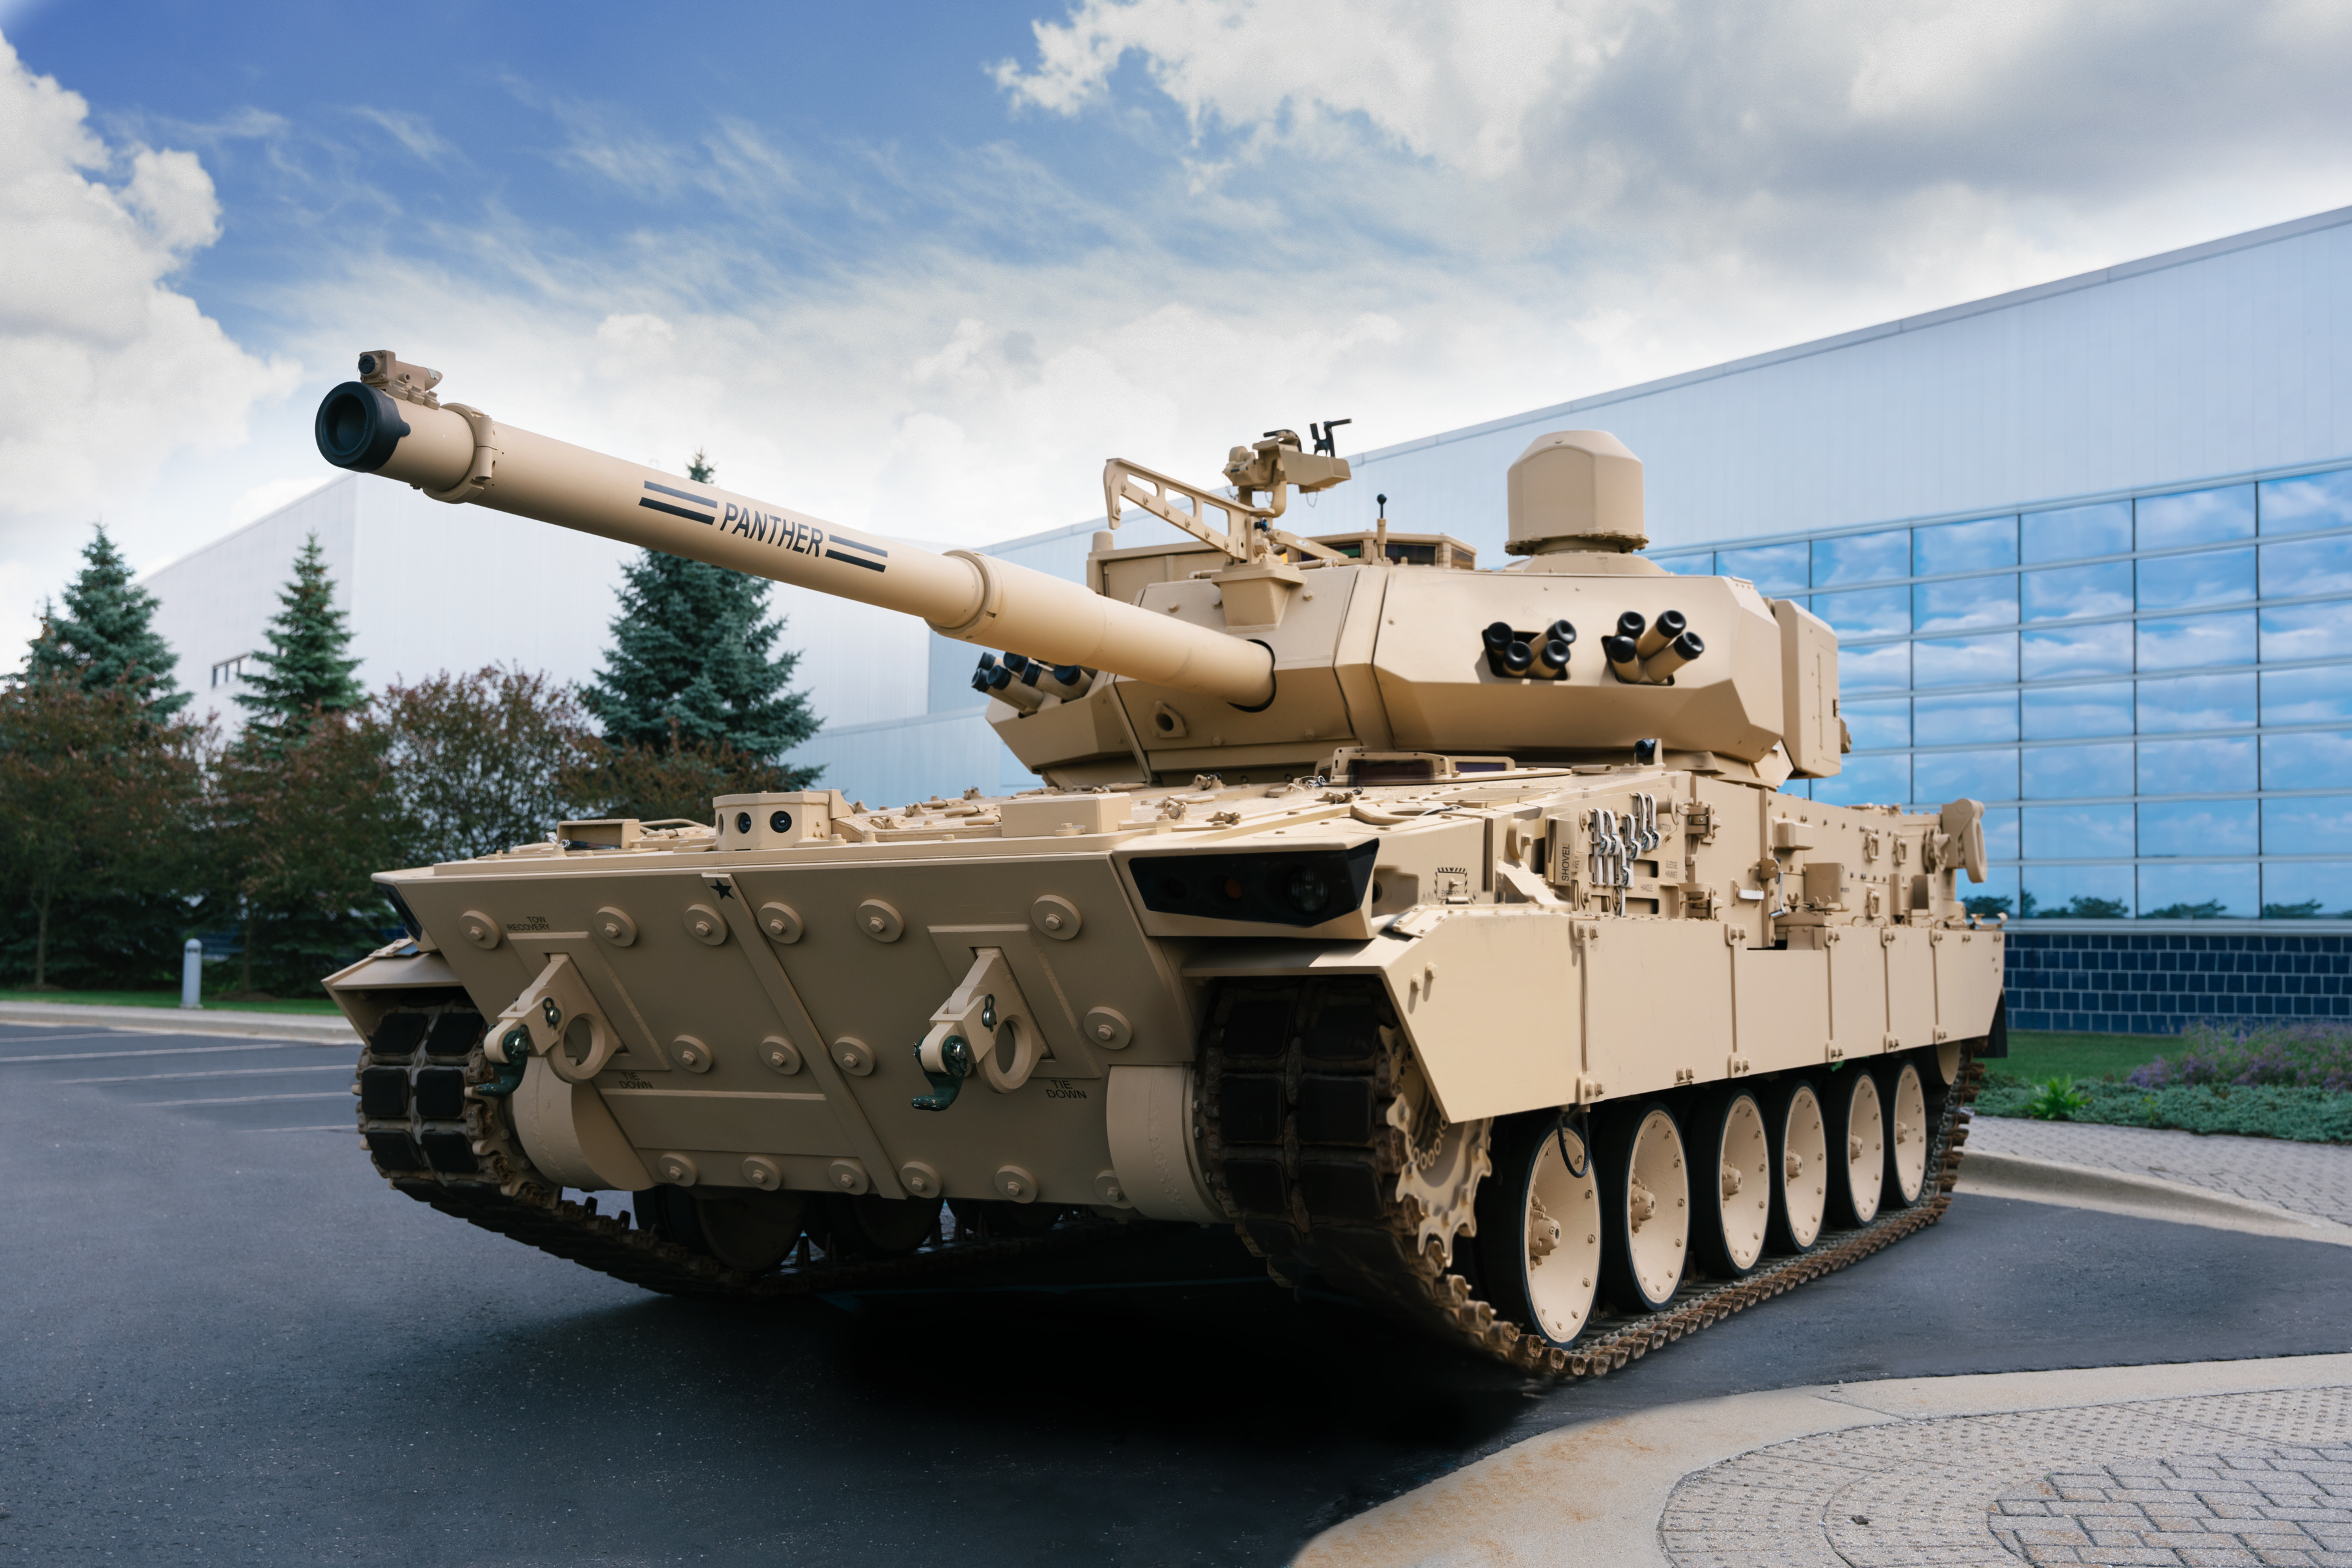 General Dynamics to begin building Army's new light tank next month